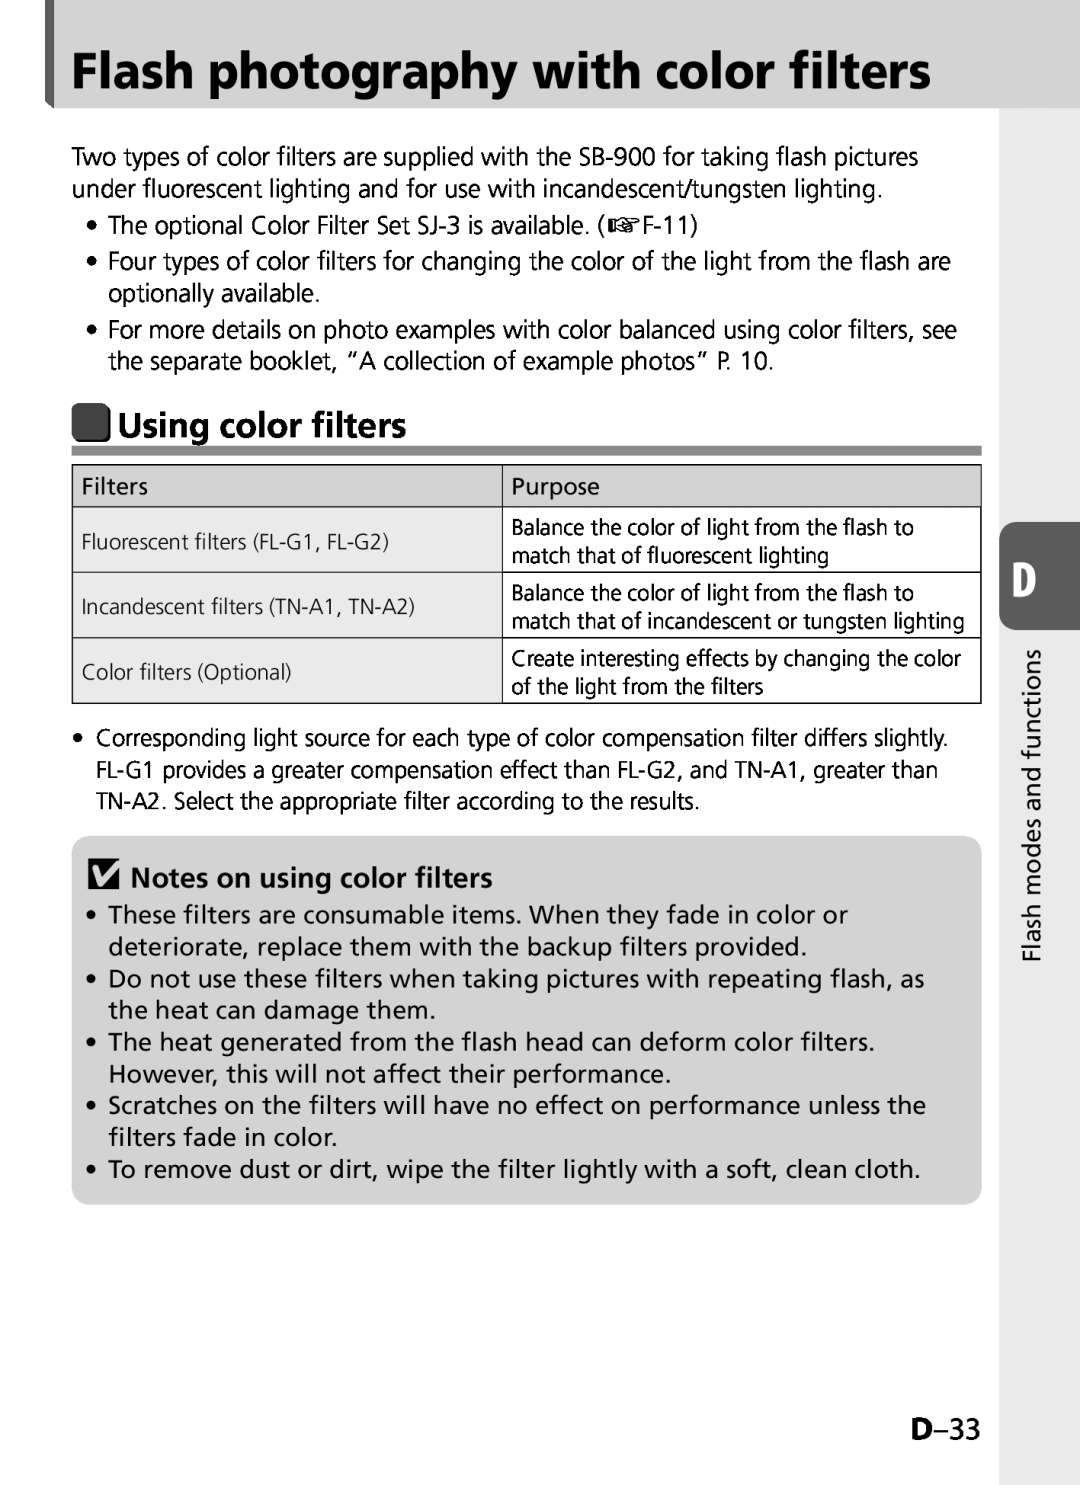 Univex SB-900 user manual Flash photography with color filters, Using color filters, D–33, vNotes on using color ﬁlters 